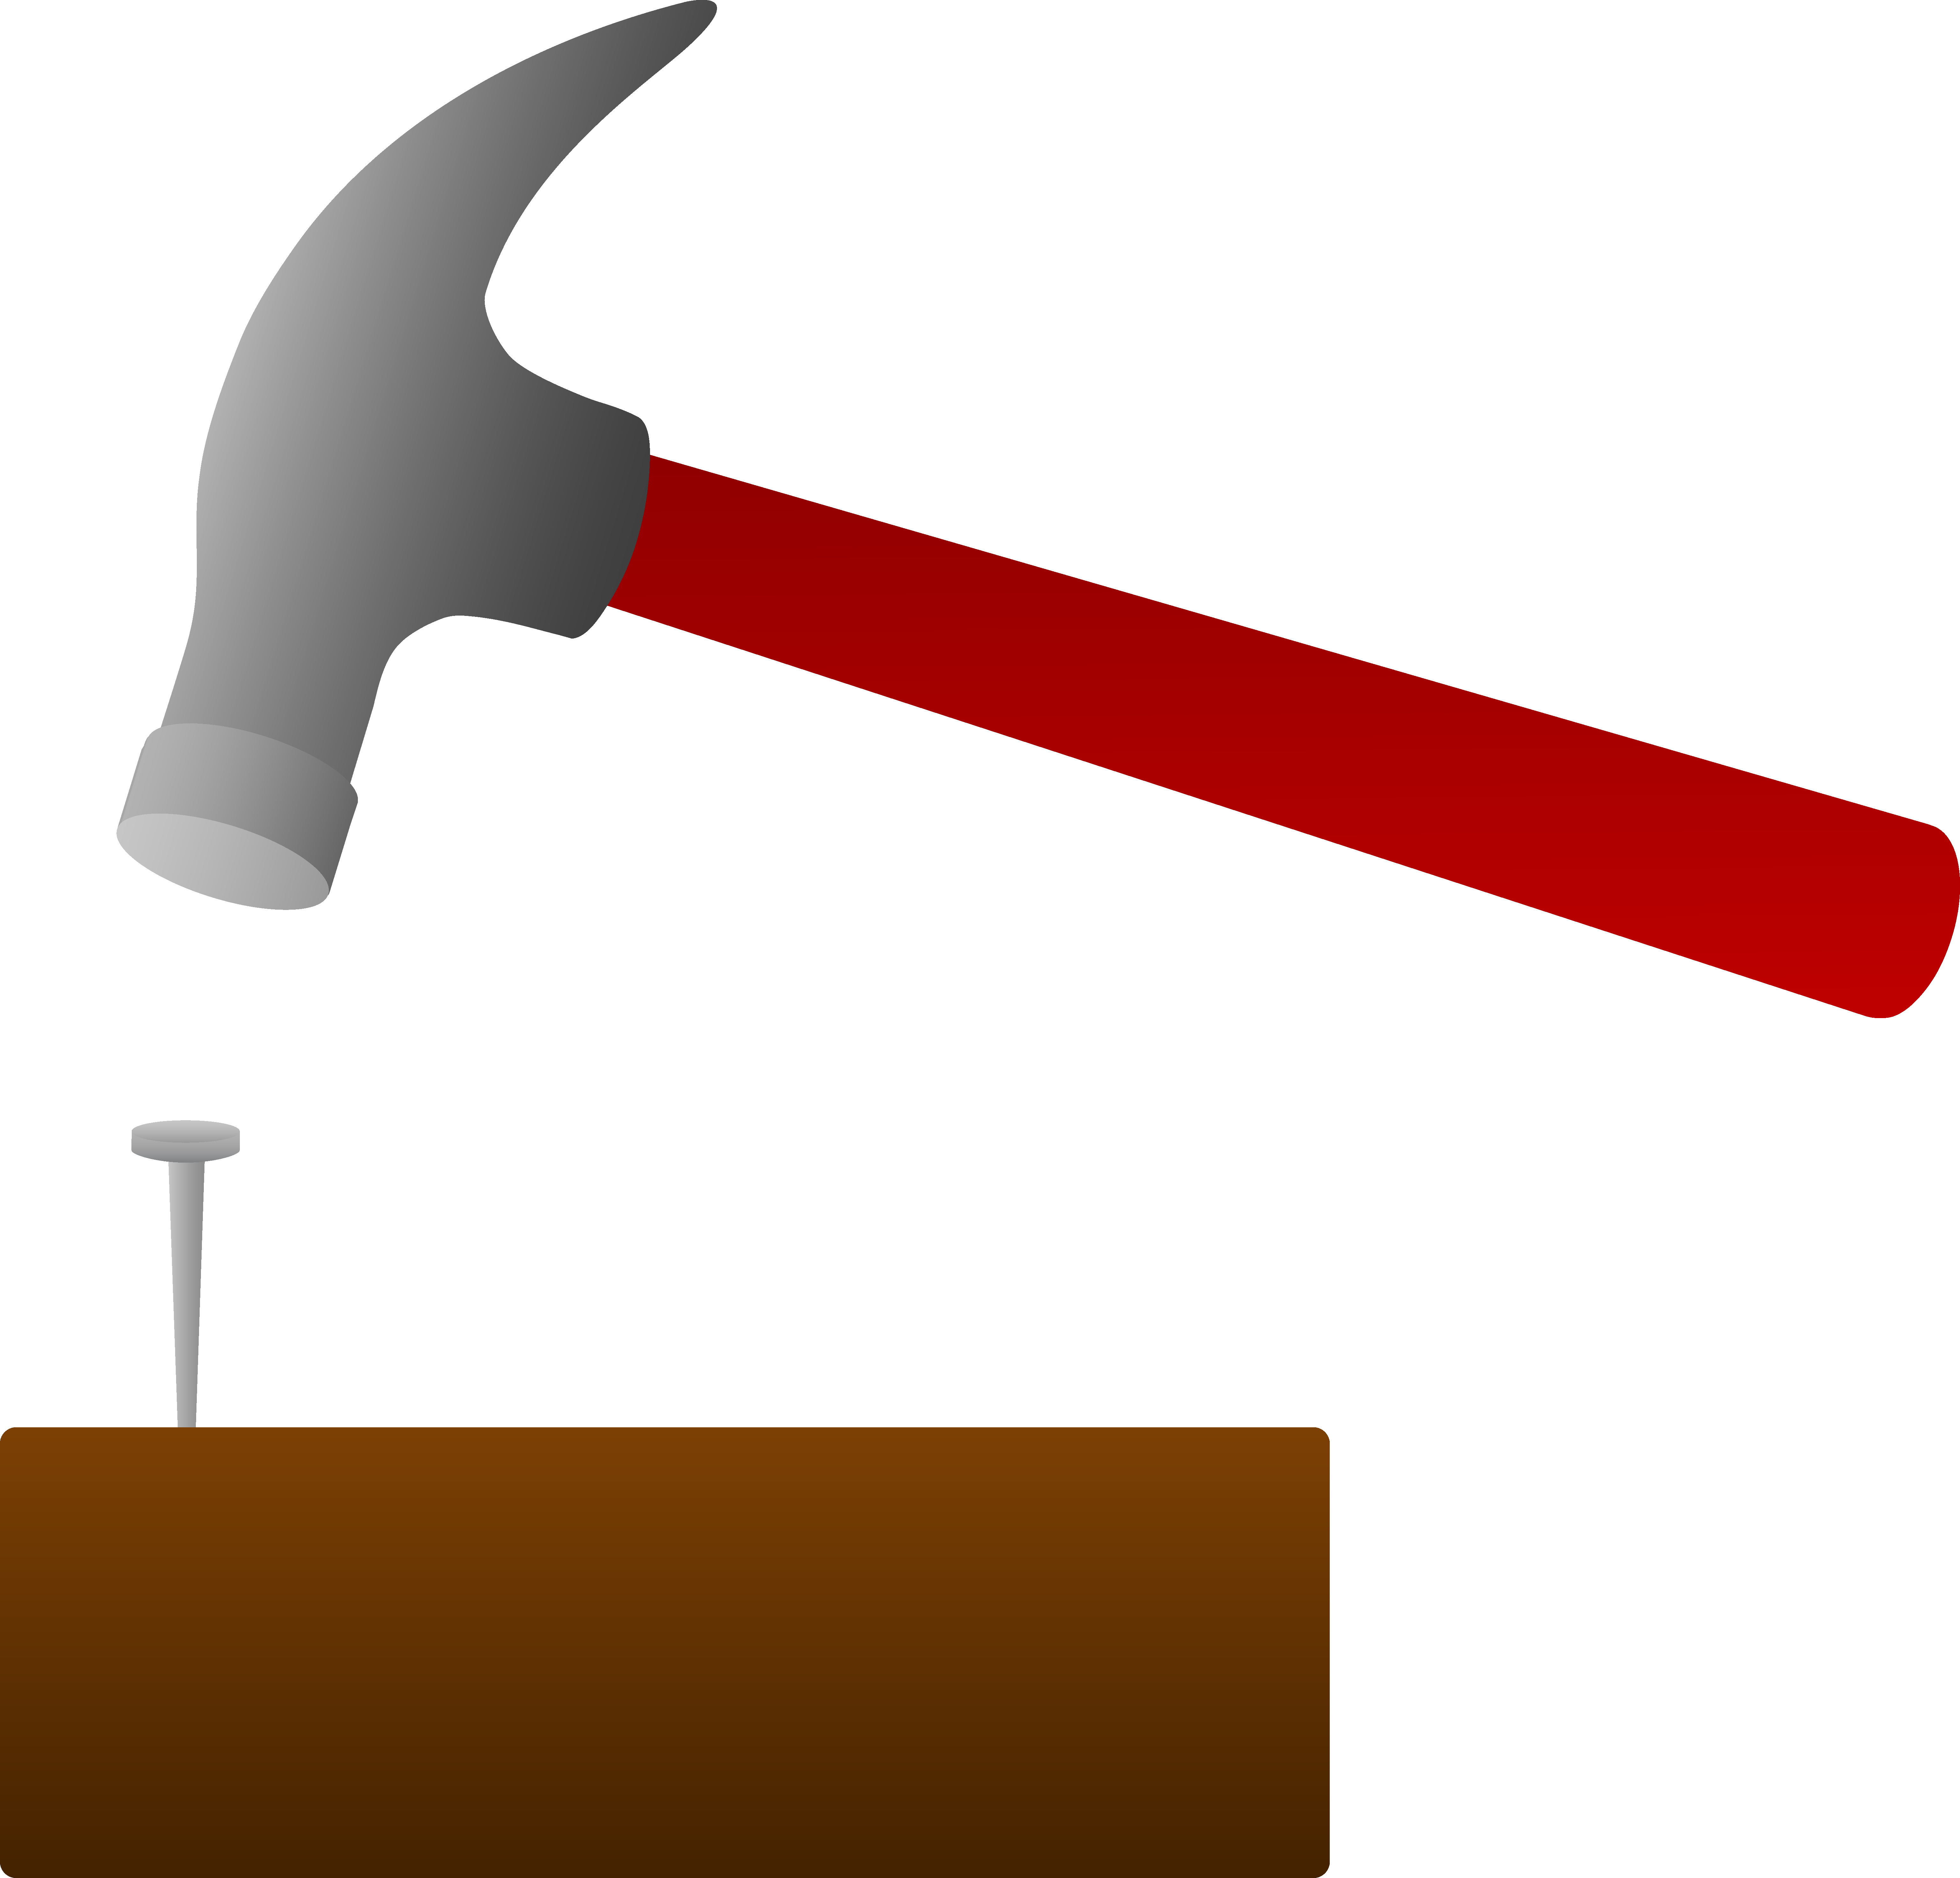 Nail and . Clipart hammer woodworking